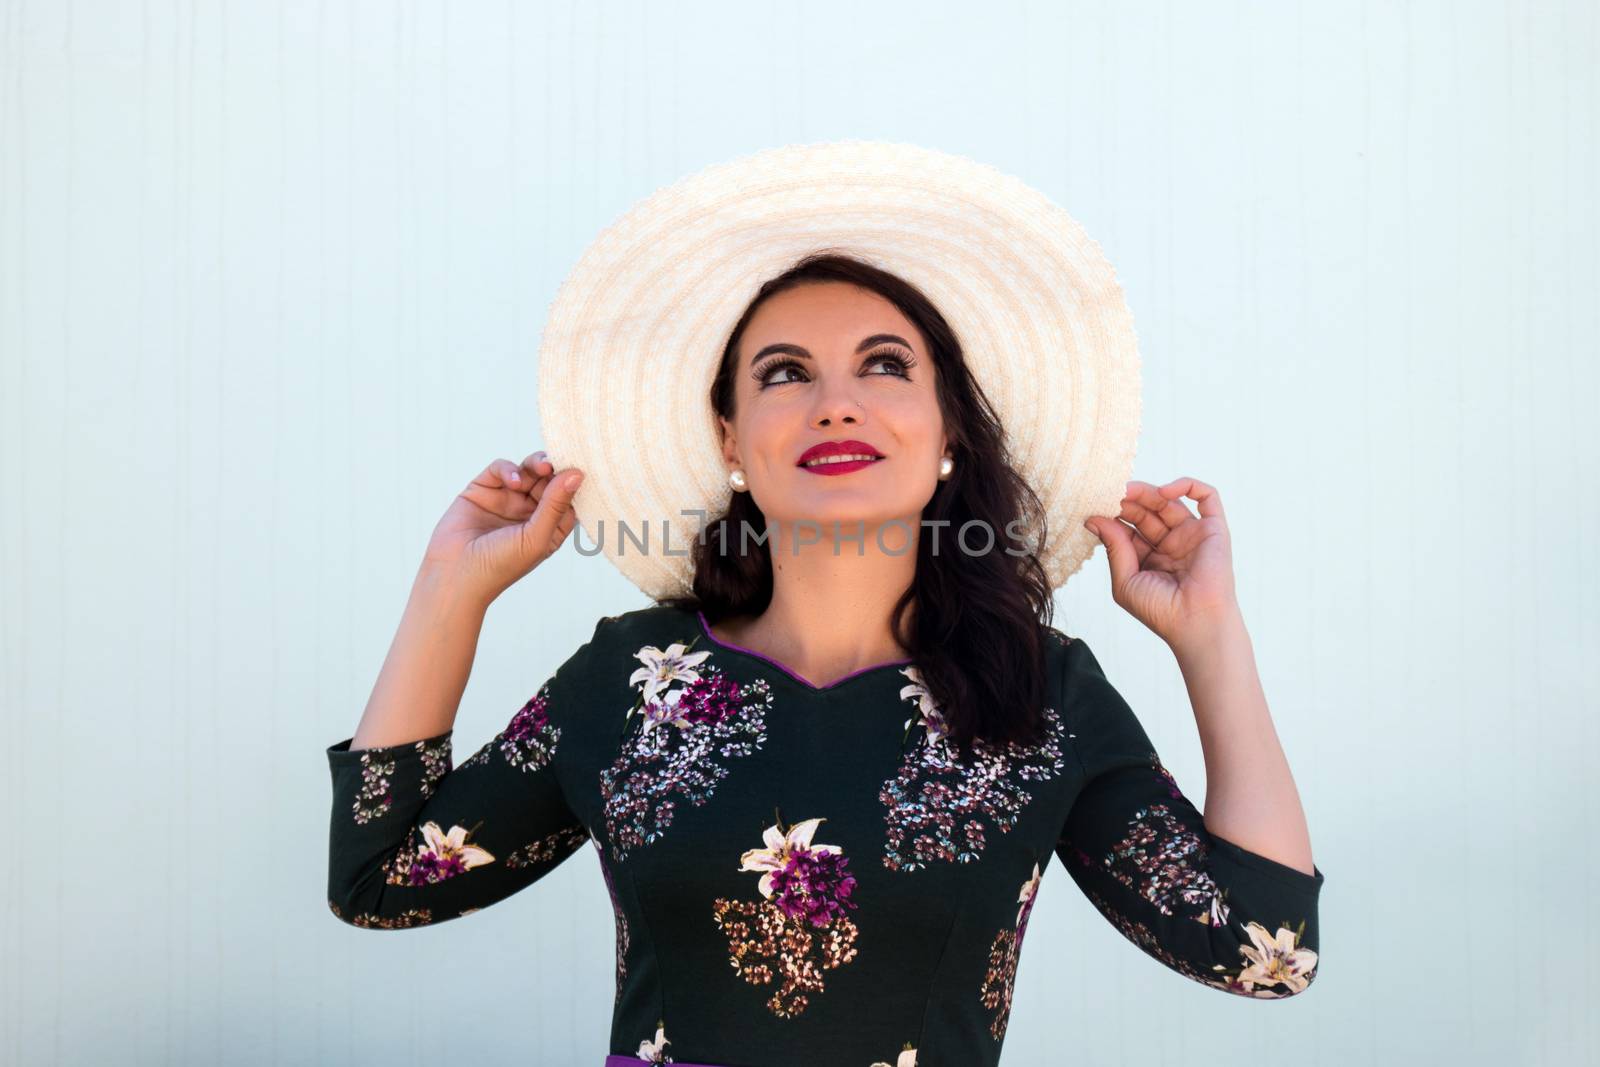 Vintage girl with beautiful floral dress with a white hat.